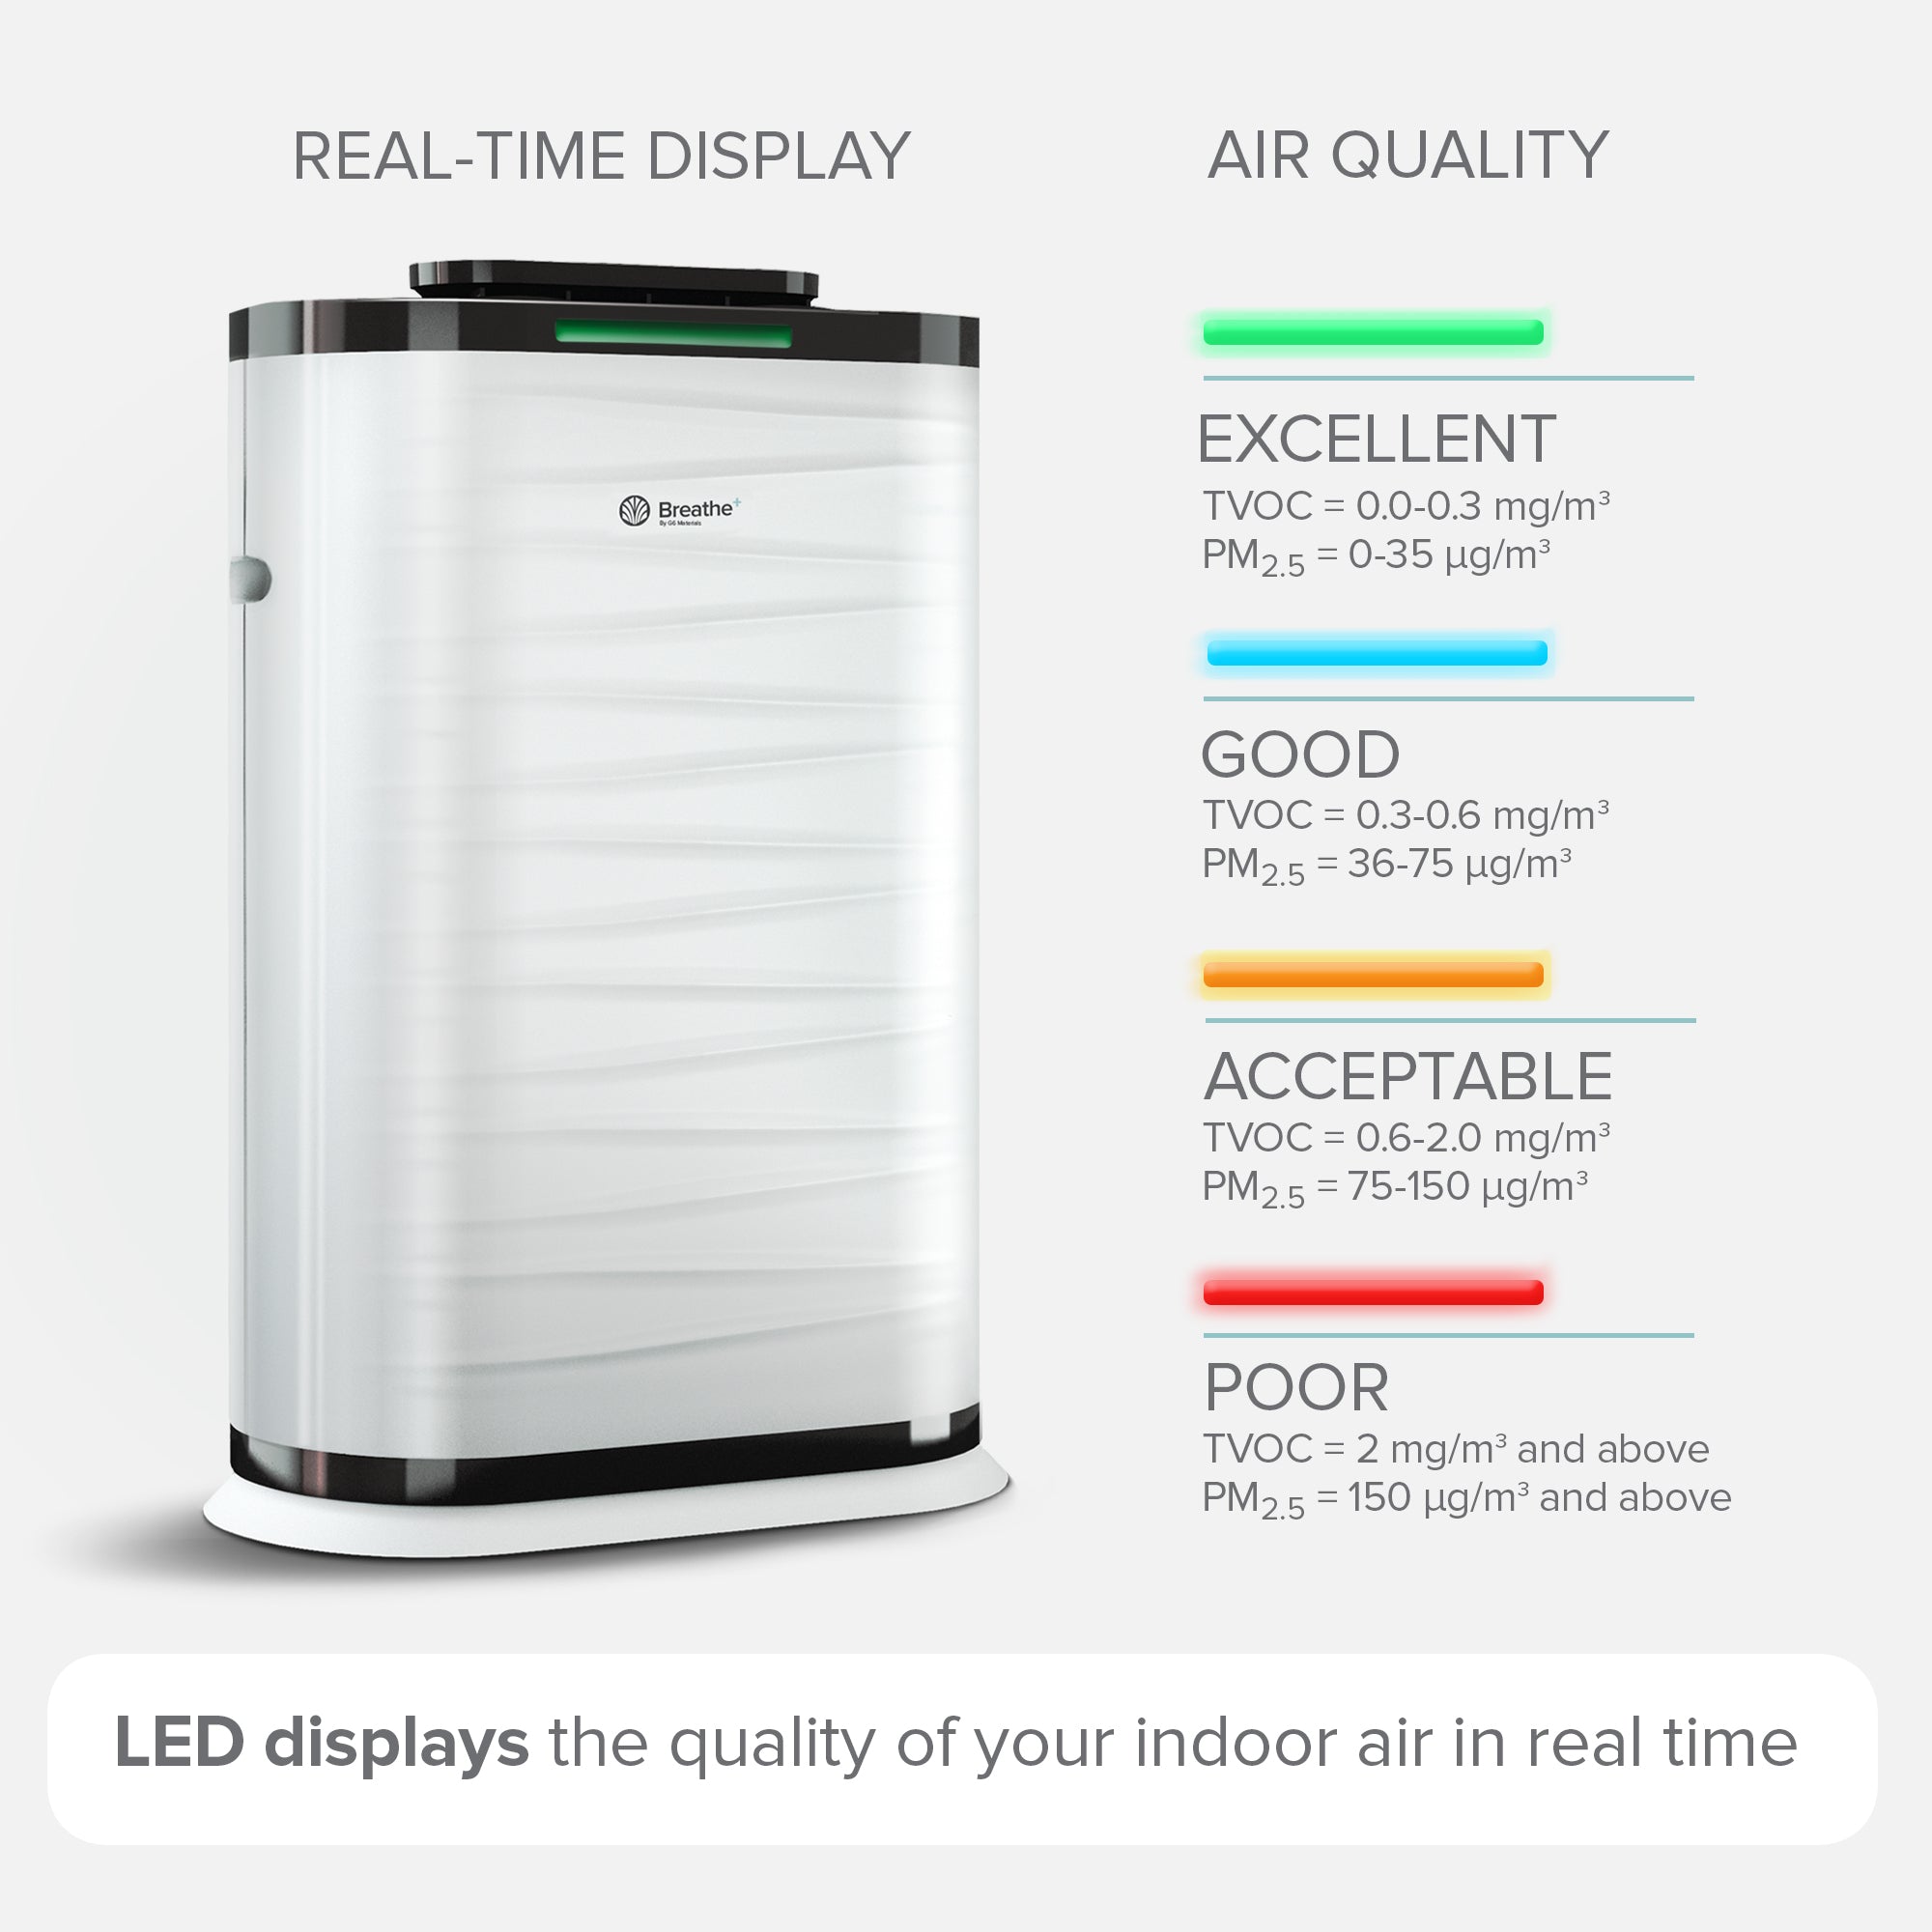 [Free Second Day Shipping] Breathe+ Pro Air Purifier